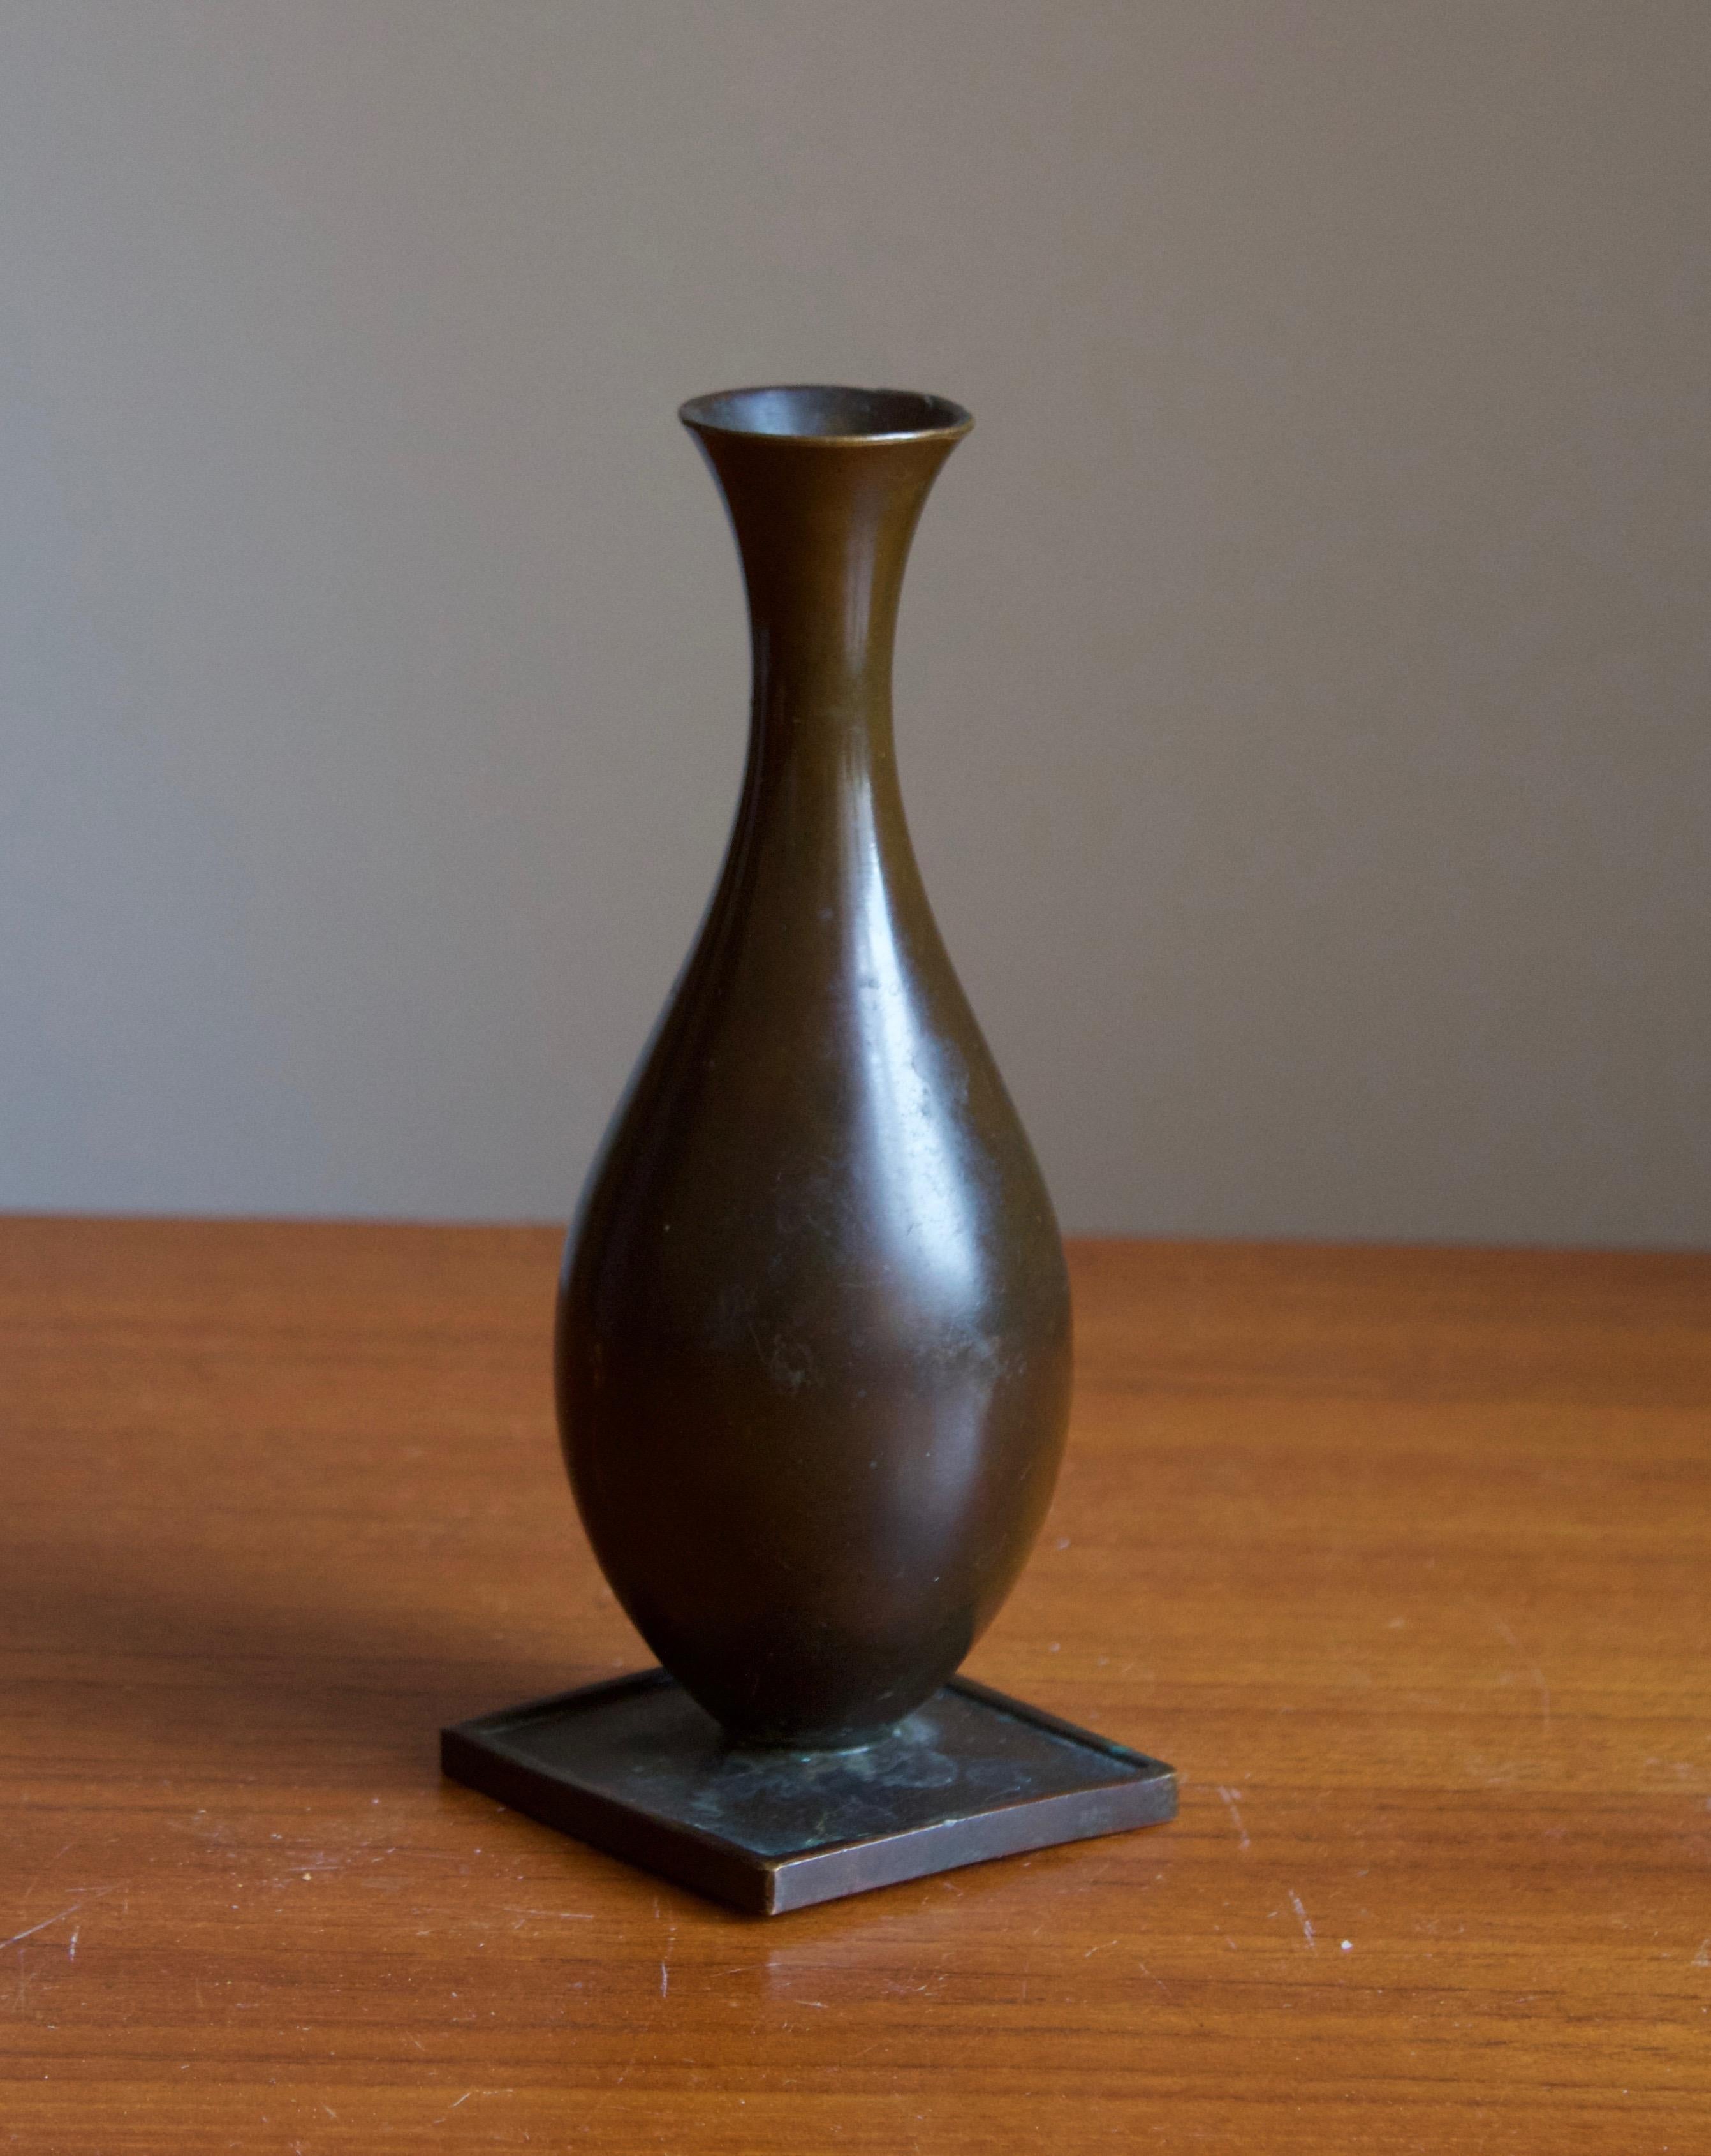 A vase or vessel, designed and produced by GAB, stamped with makers mark, Sweden, 1930s. In cast bronze.

Other designers of the period include Josef Frank, Kaare Klint, Estrid Ericson, and Just Andersen.
    